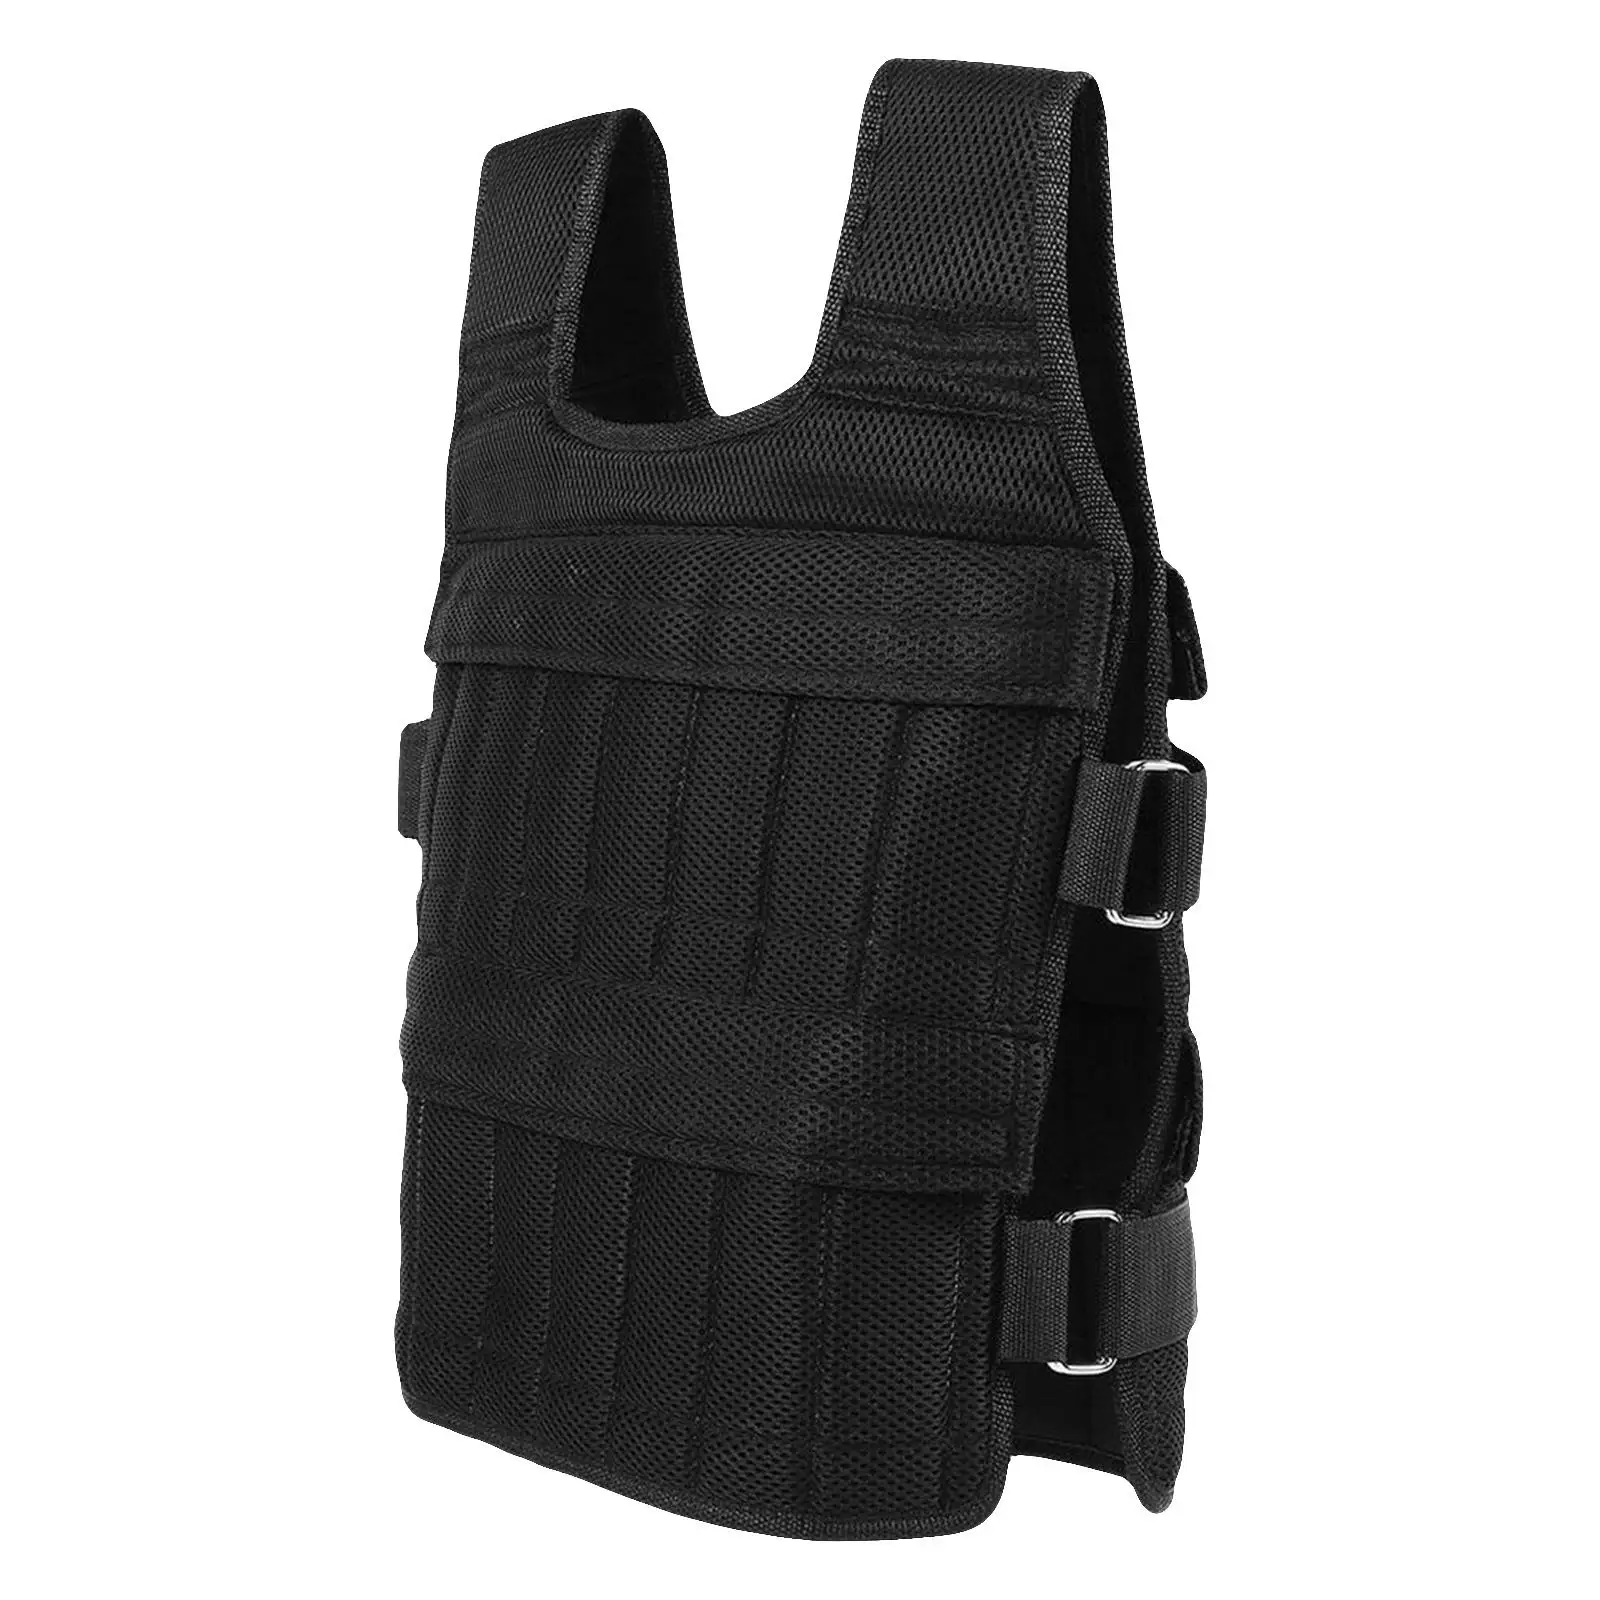 Professional Adjustable weight vest with 32 Bags Neoprene Durable Soft 110lbs